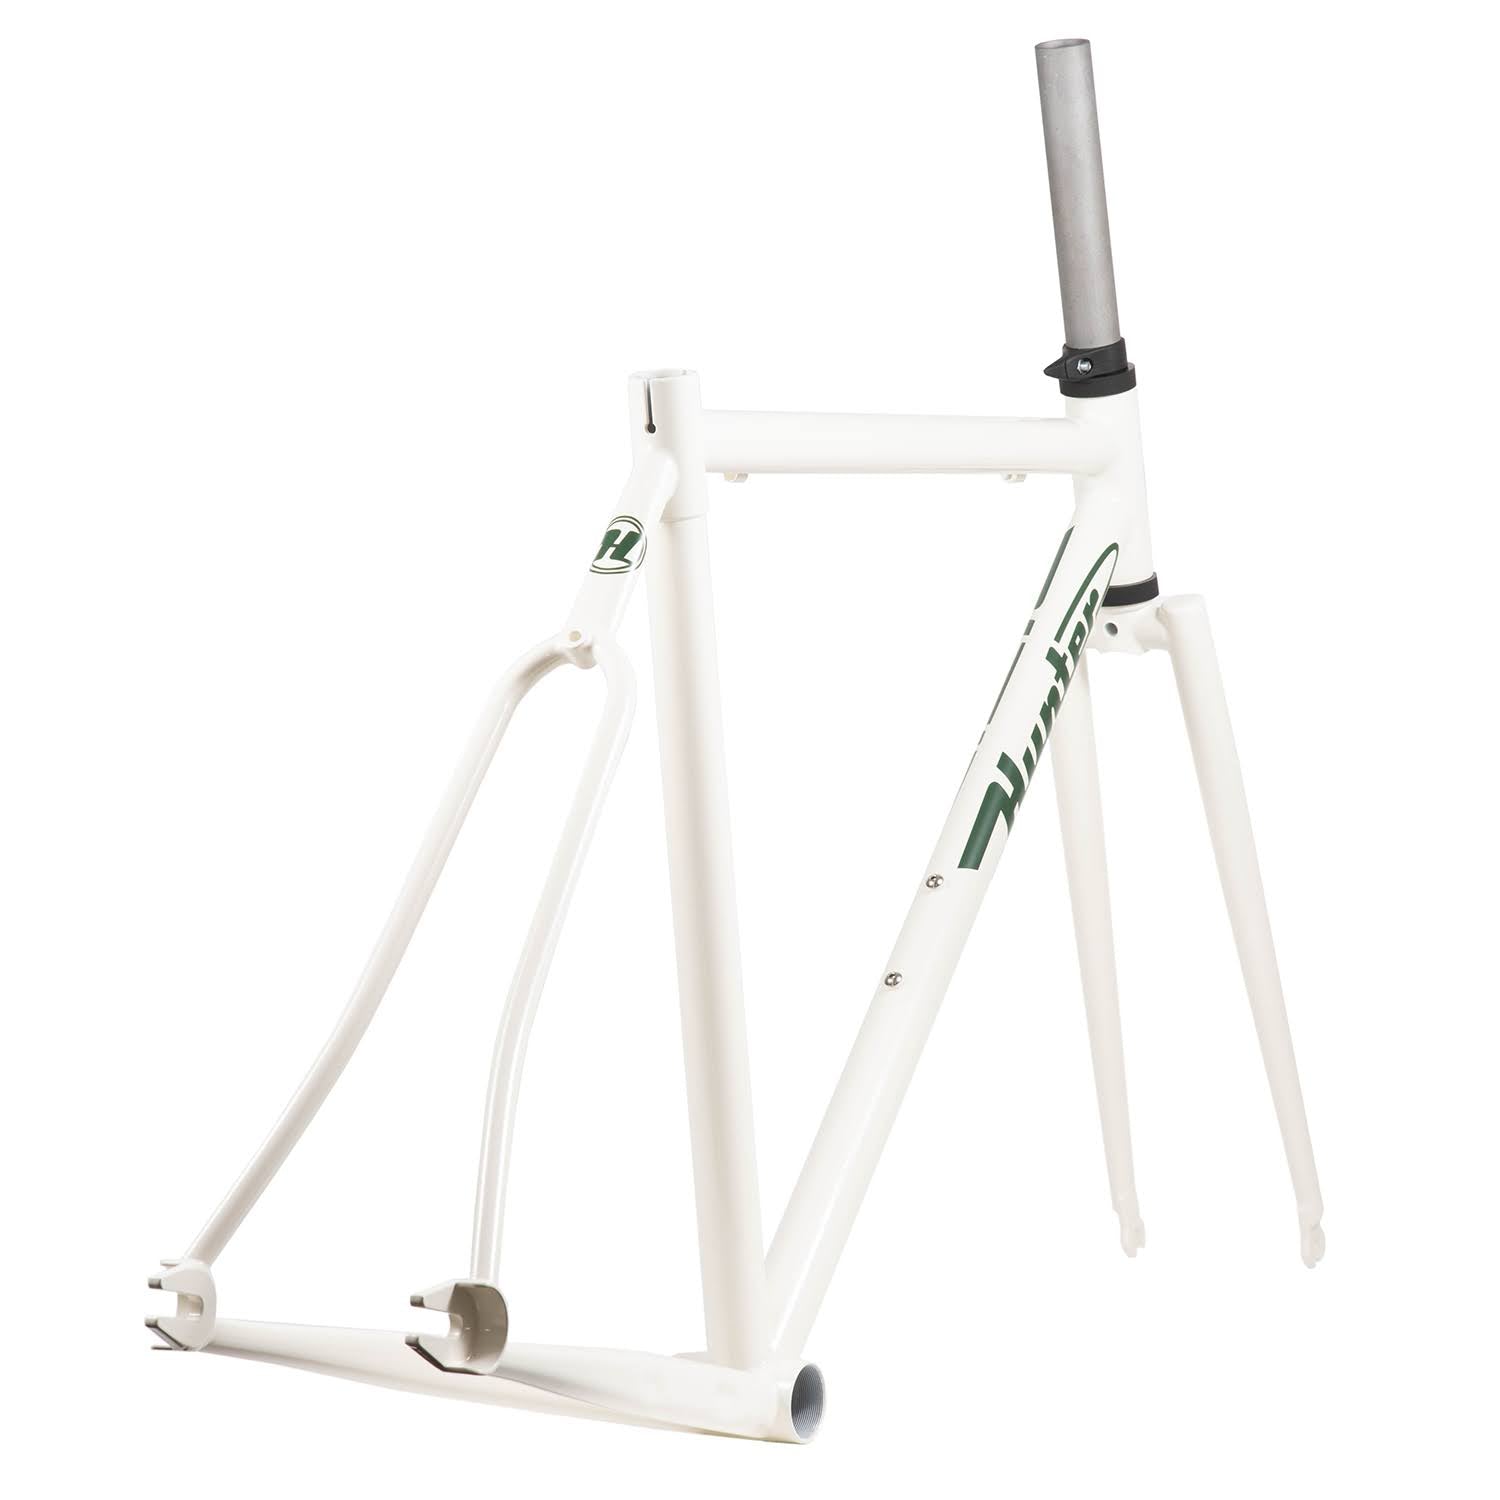 HUNTER CYCLES Track Frame